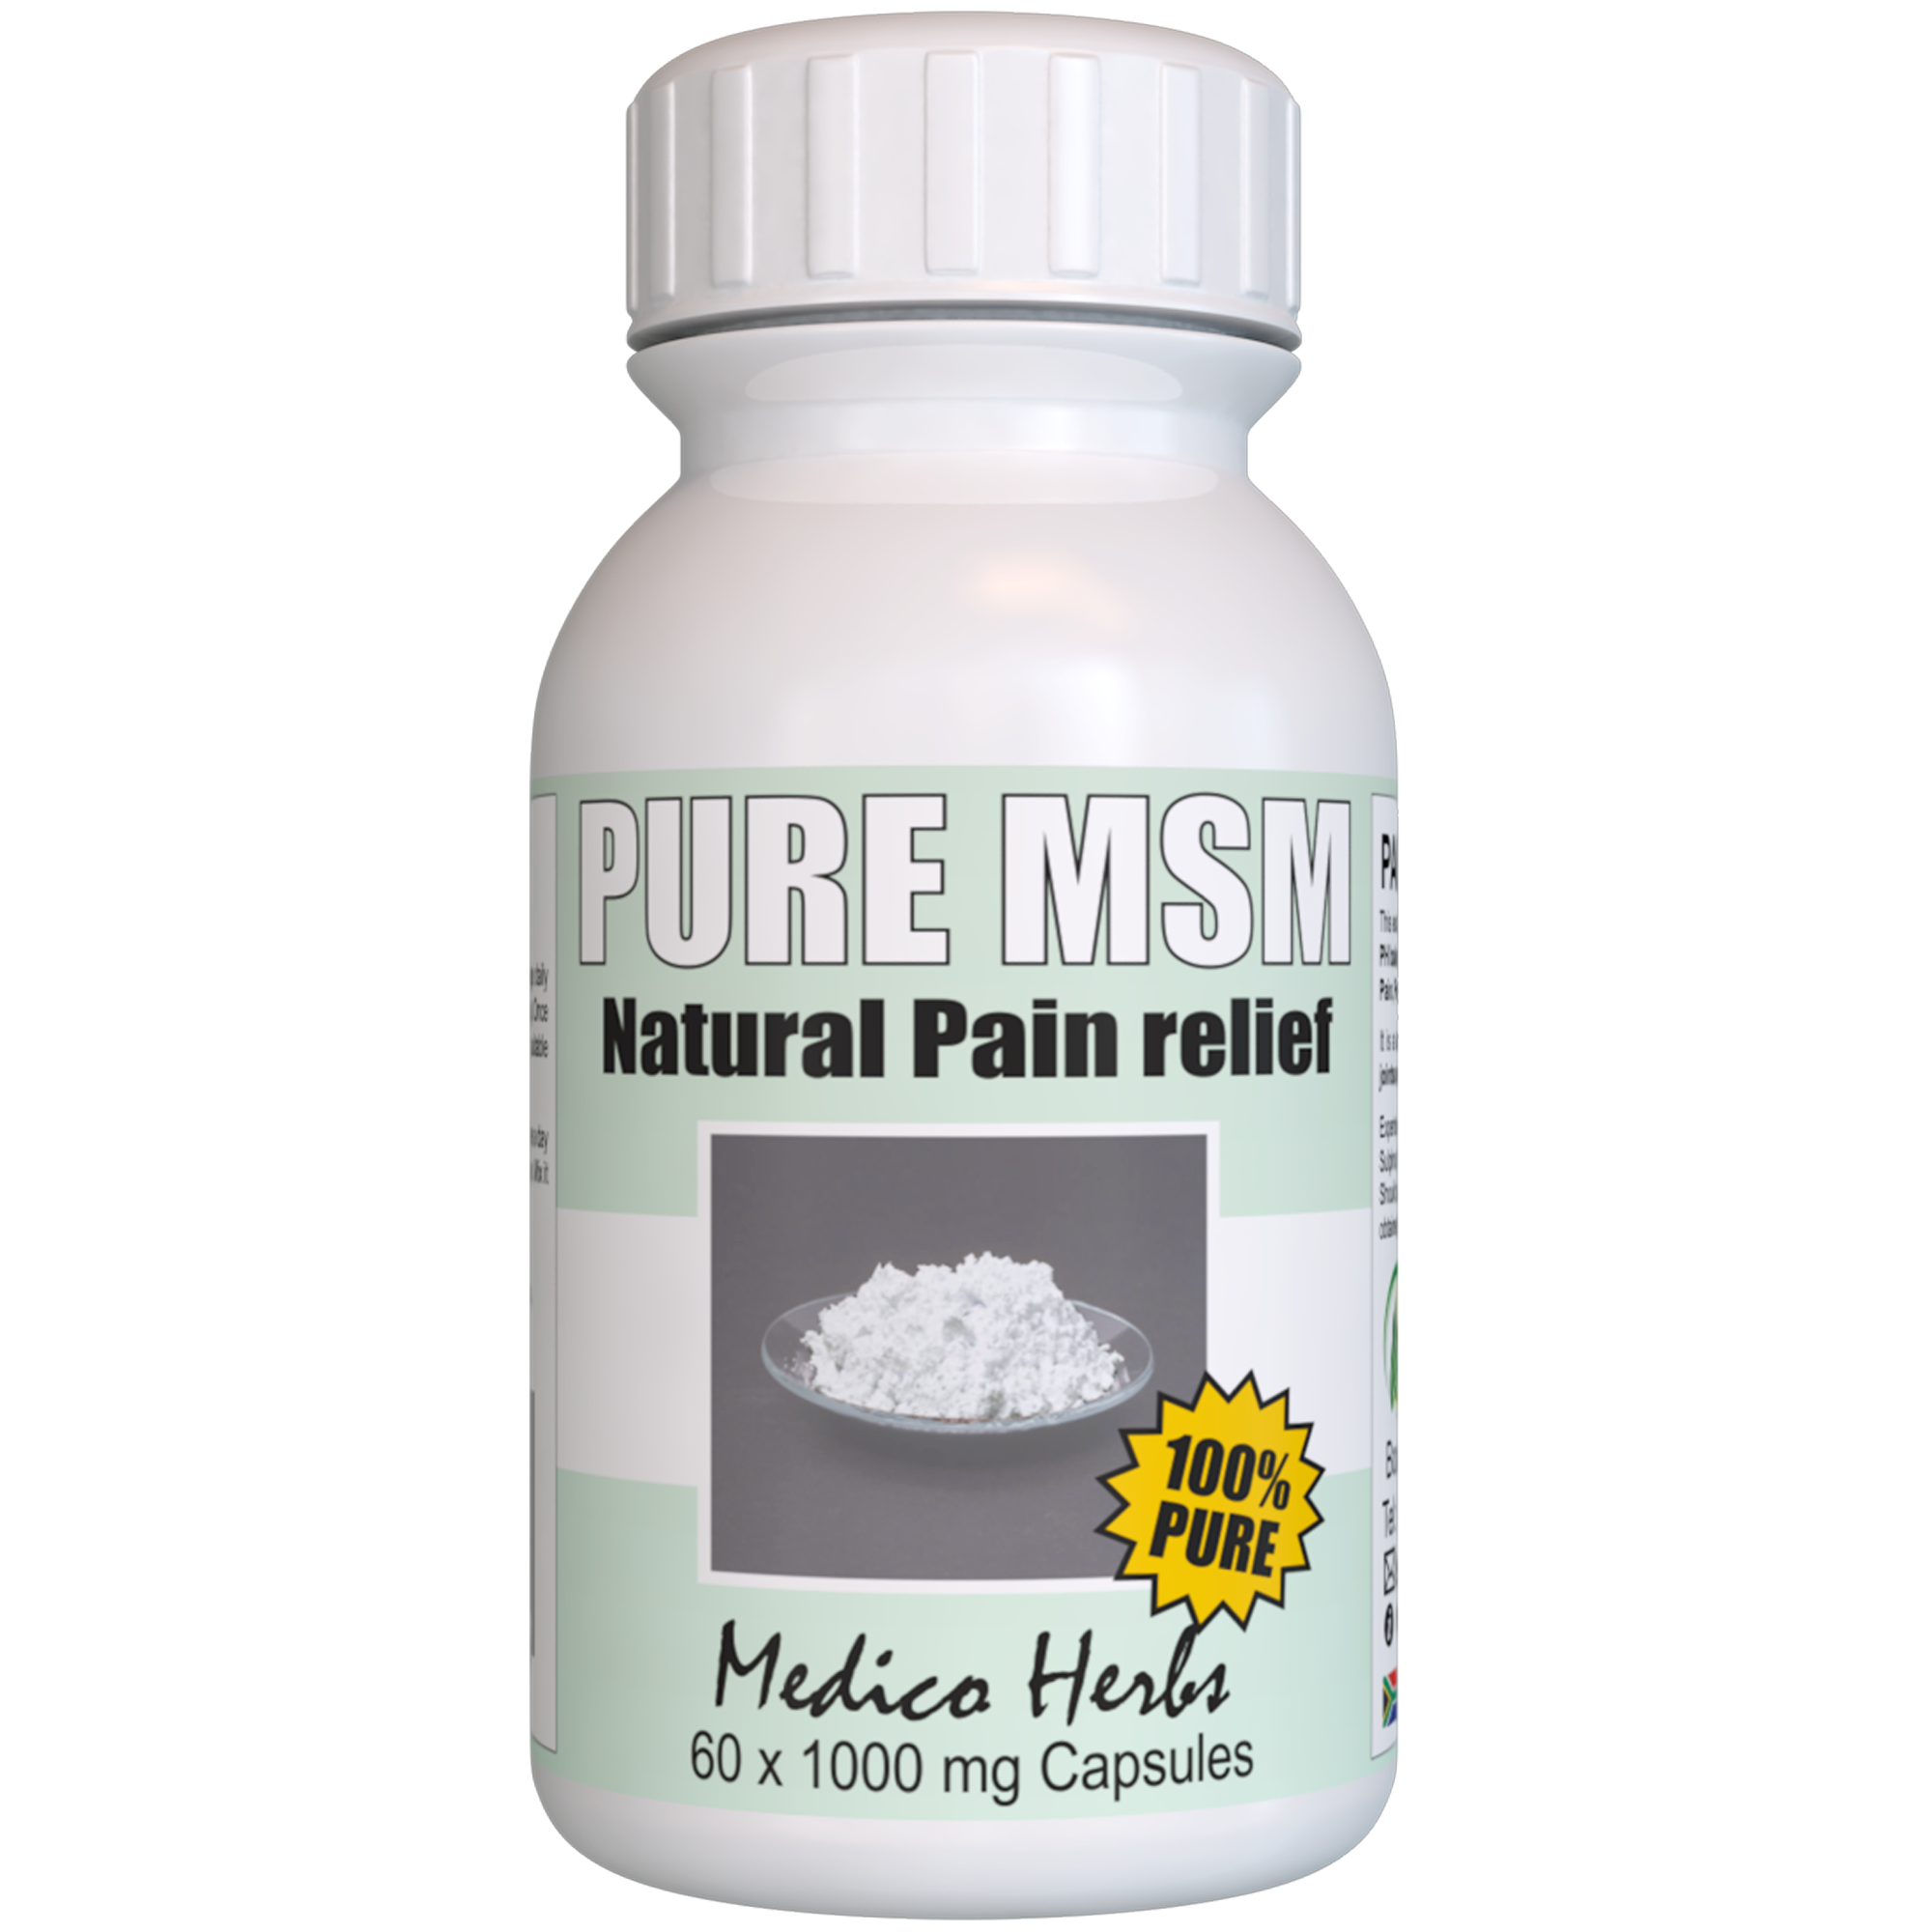 Pain Relief - 100% Natural MSM 60x1000mg Capsules x 2 bottles